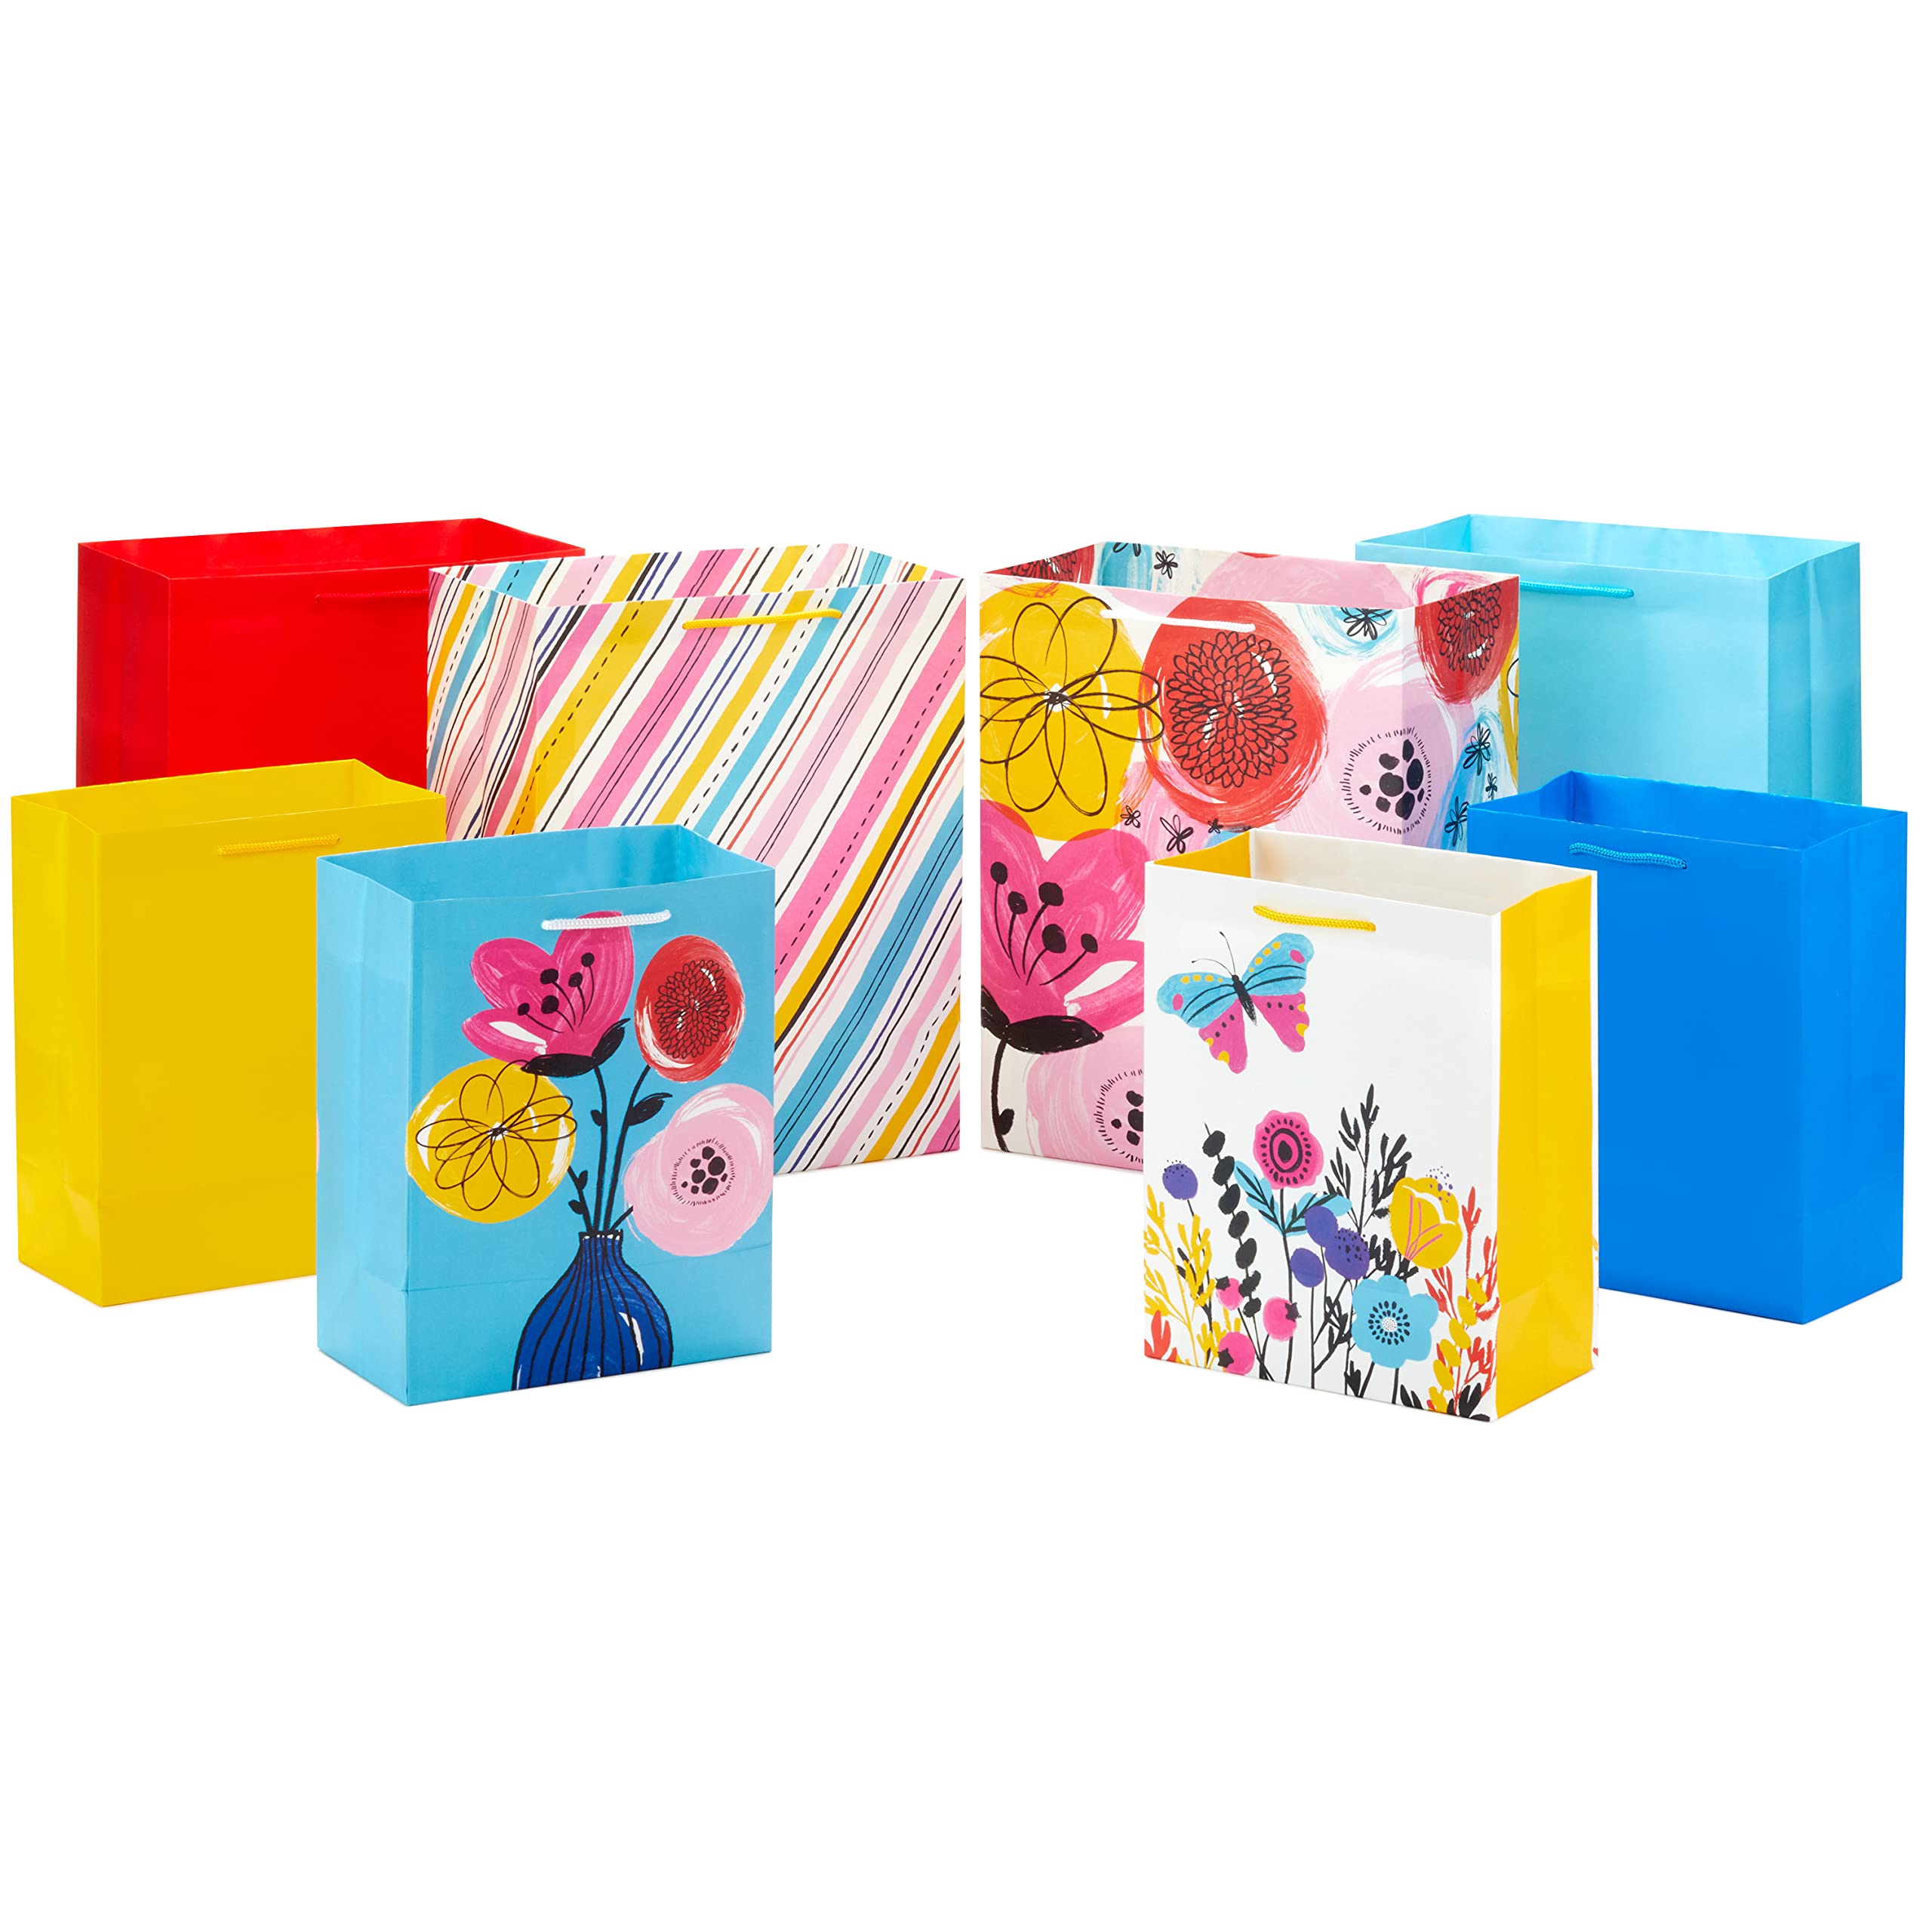 Hallmark Assorted All-Occasion Gift Bags (8 Bags: 4 Medium 9